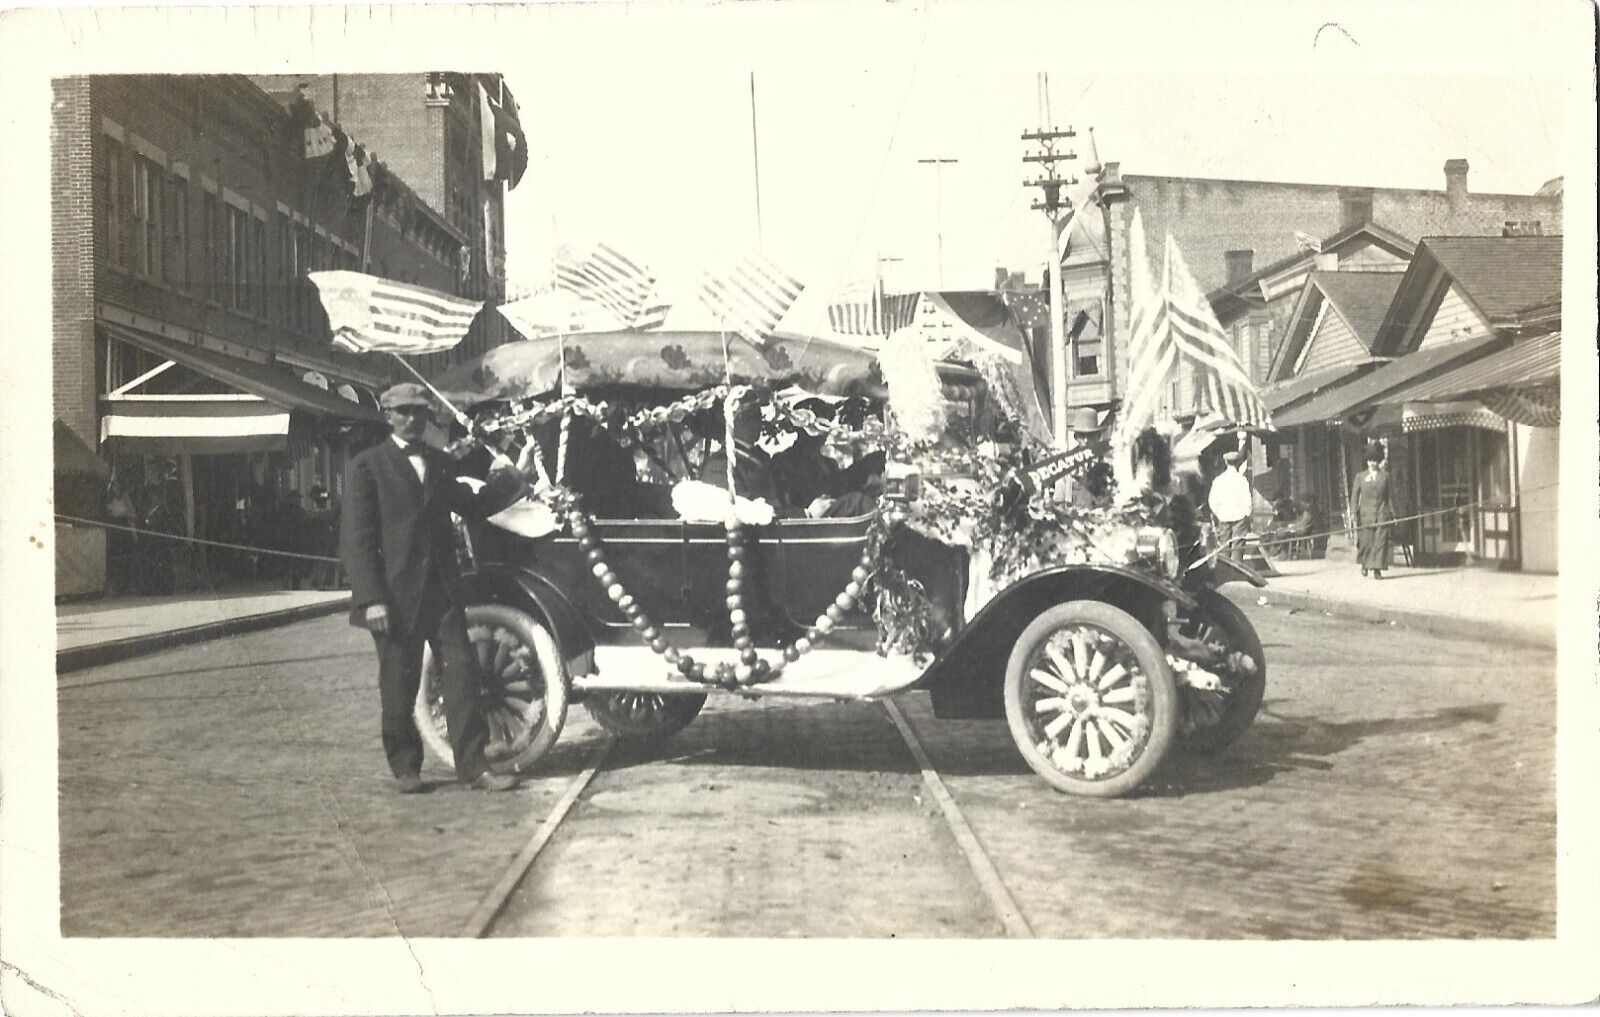 Decatur MI -- Model T with flags/decorations in parade; nice 1910s RPPC